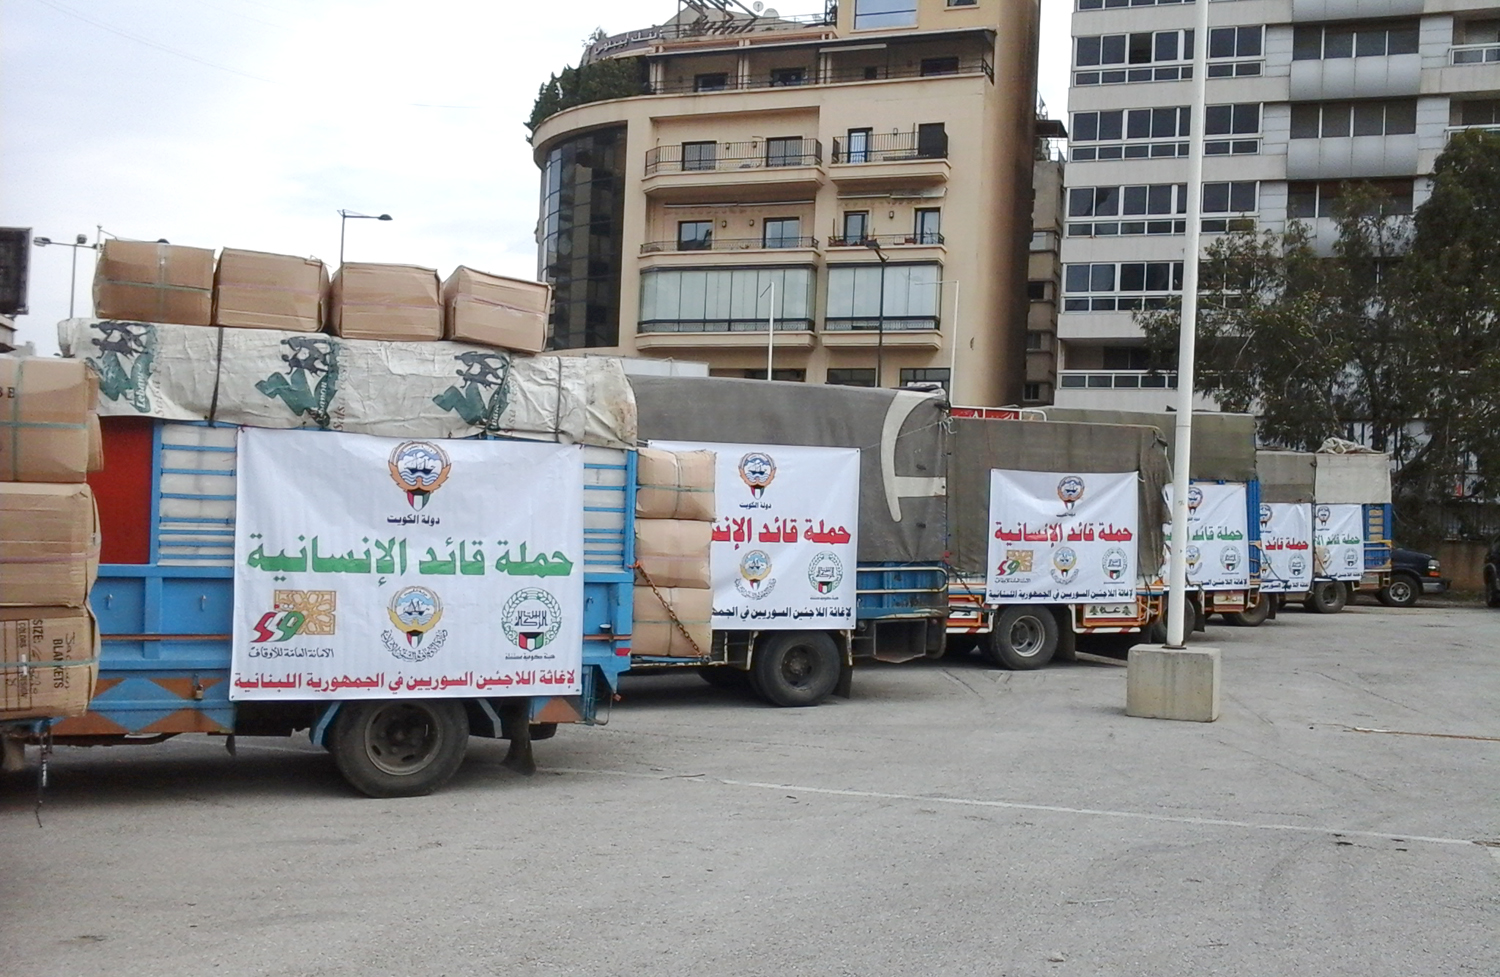 A Kuwaiti relief campaigns for the displaced Syrians in Lebanon